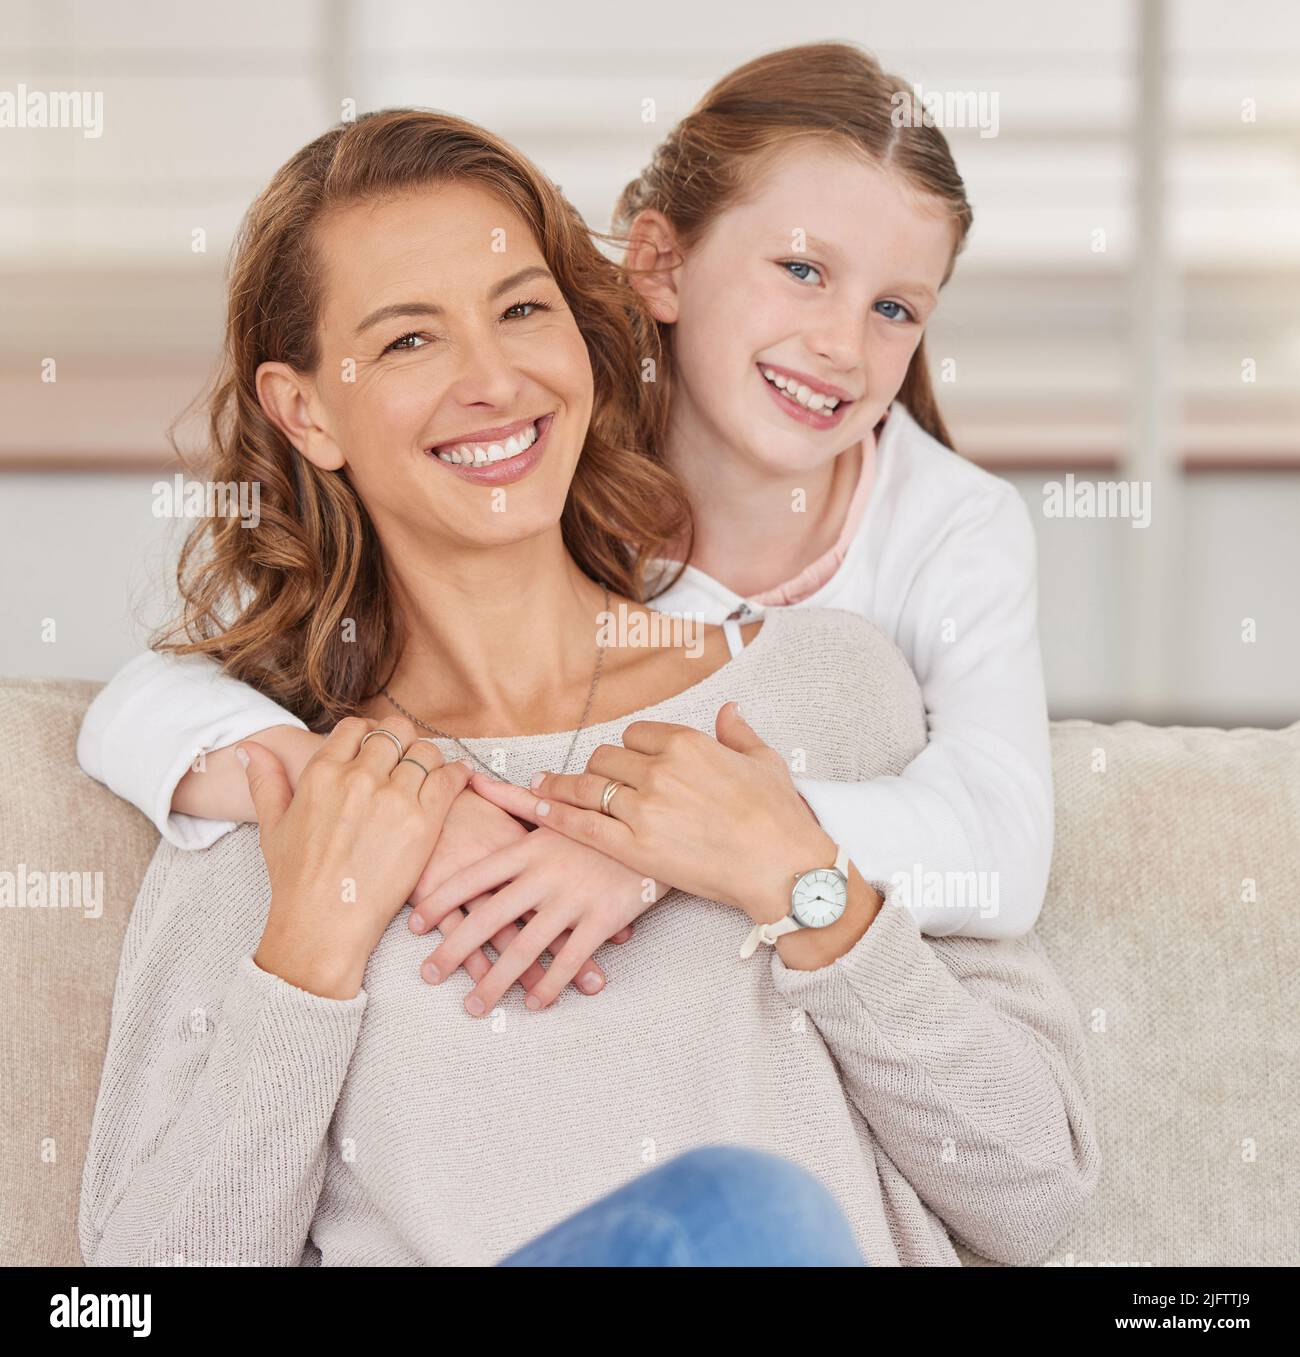 Portrait of a single mother and her daughter. Adorable girl bonding with her single parent and hugging in the living room at home. Smiling woman and Stock Photo